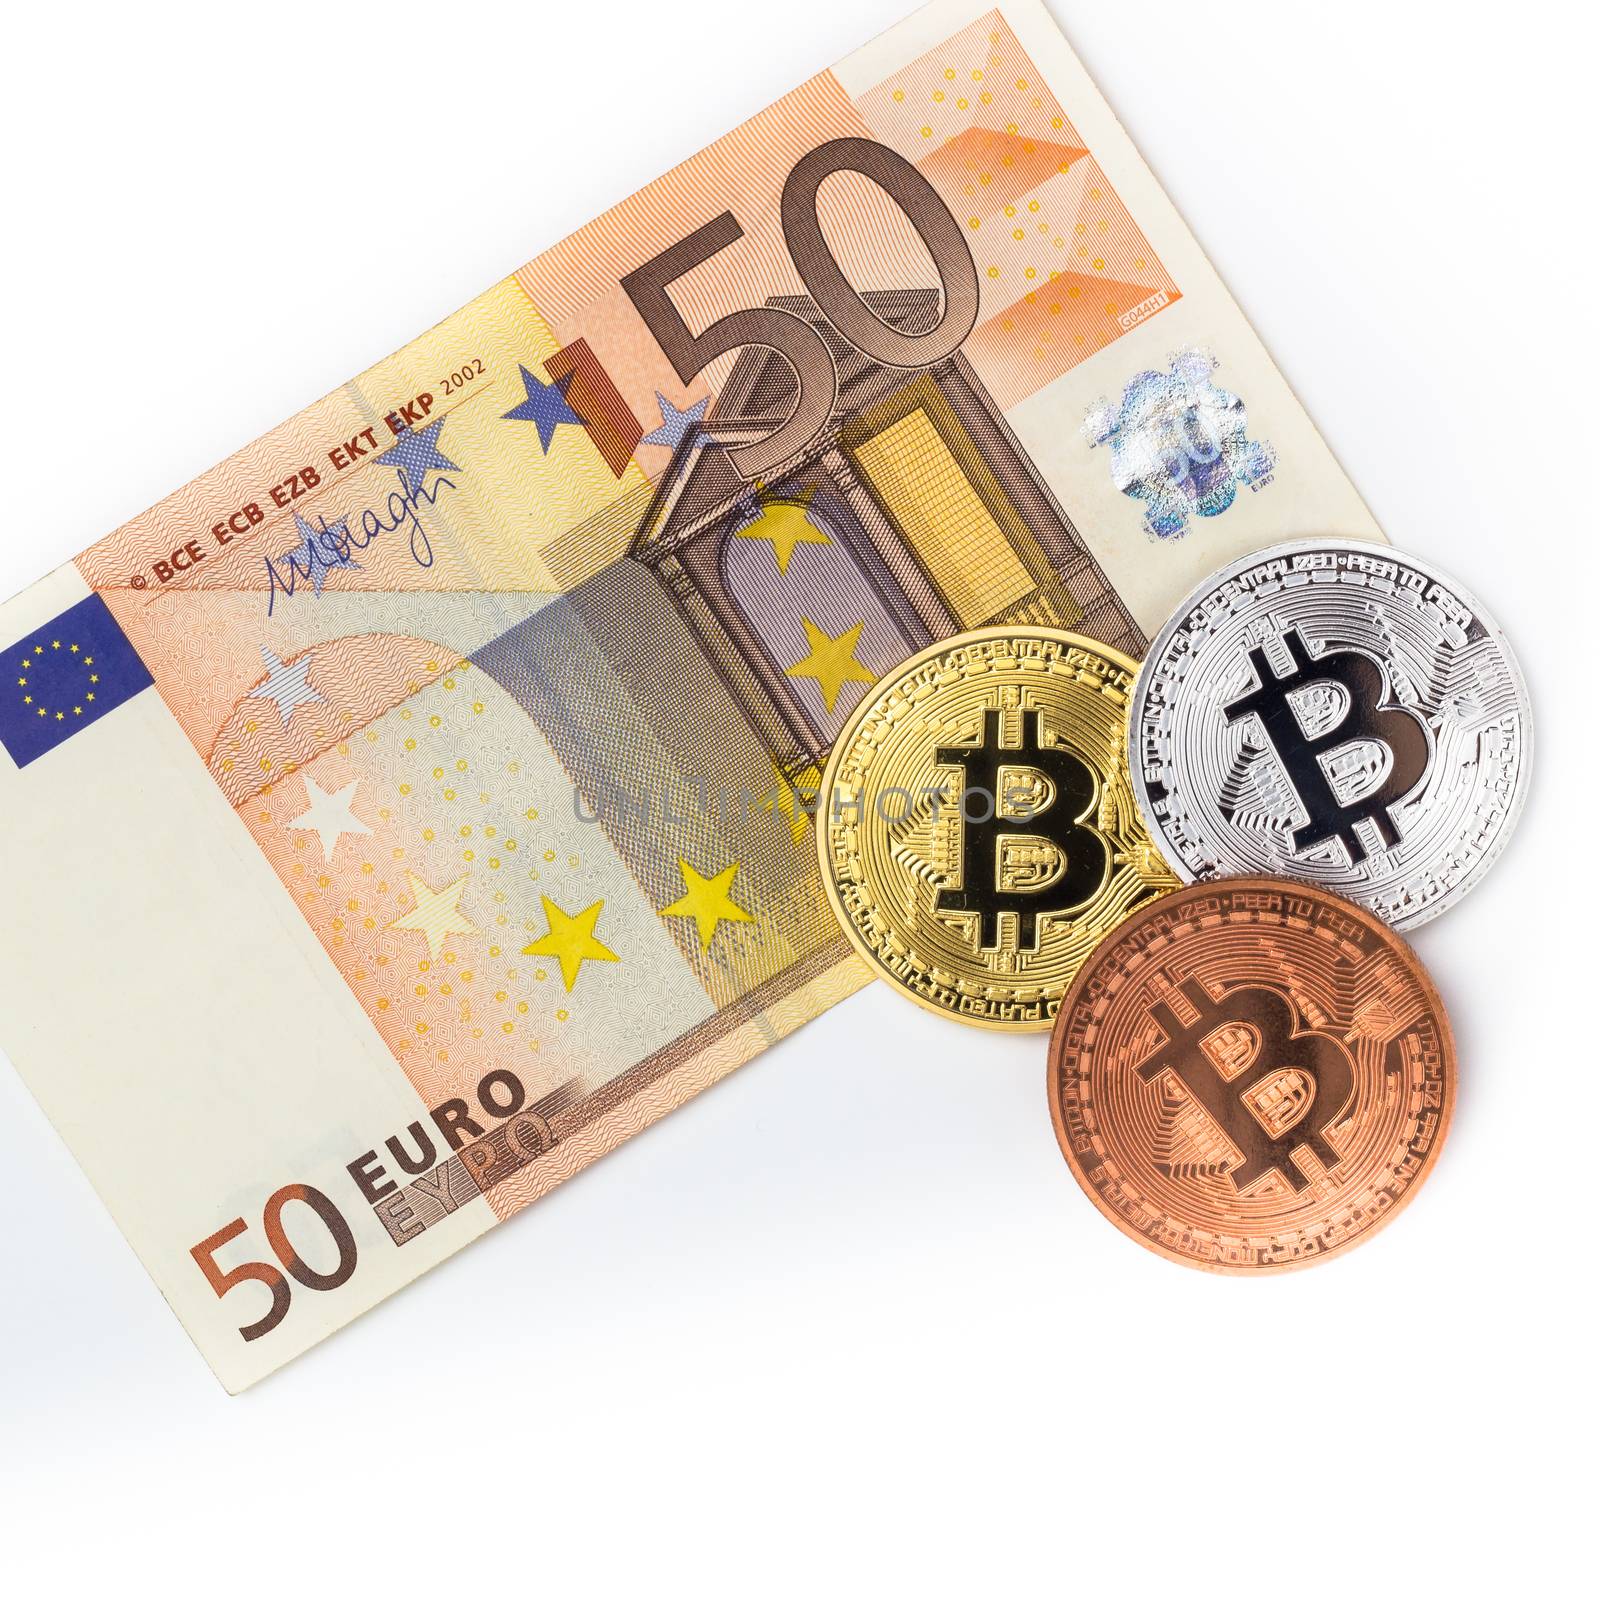 Financial concept with Bitcoins on fifty euro banknote. Traditional money vs cryptocurrency concept.